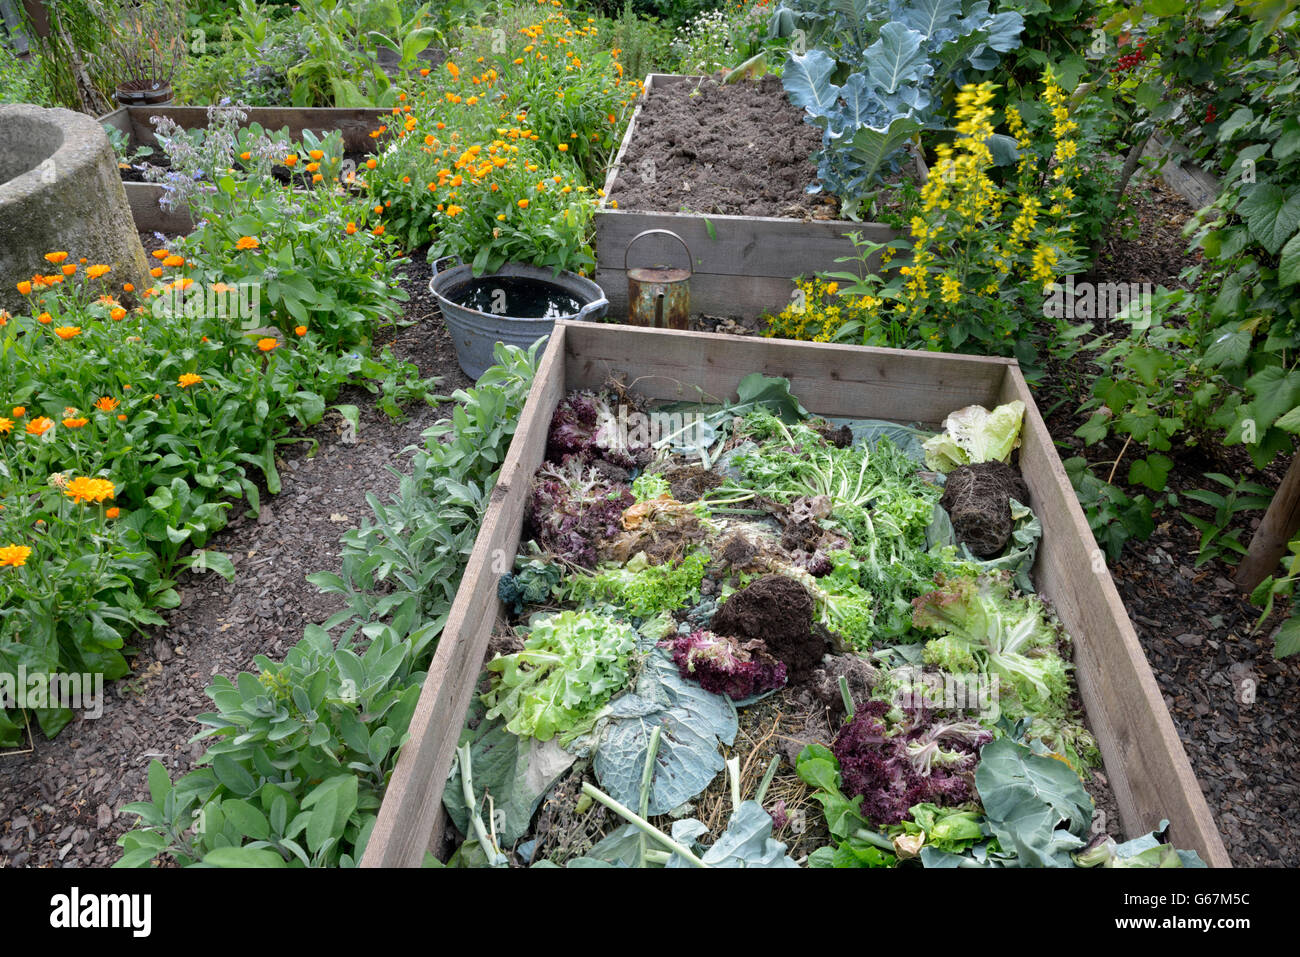 Composting in wooden frame bed / compost Stock Photo